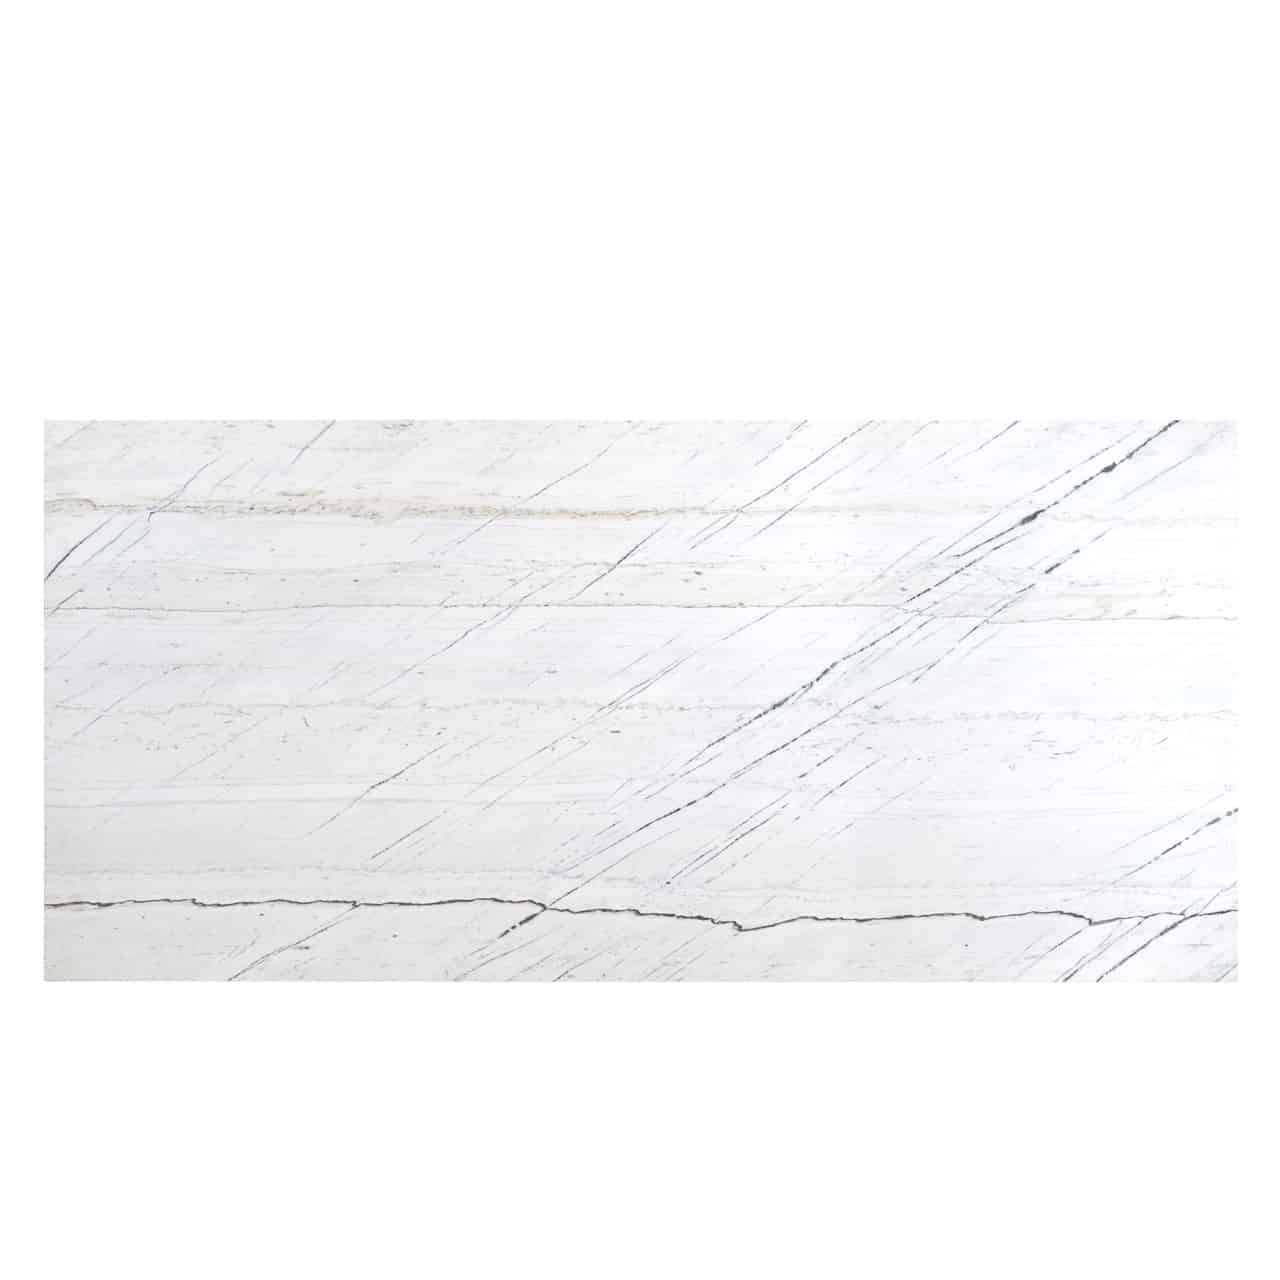 Lexi 2m White Marble Dining Table